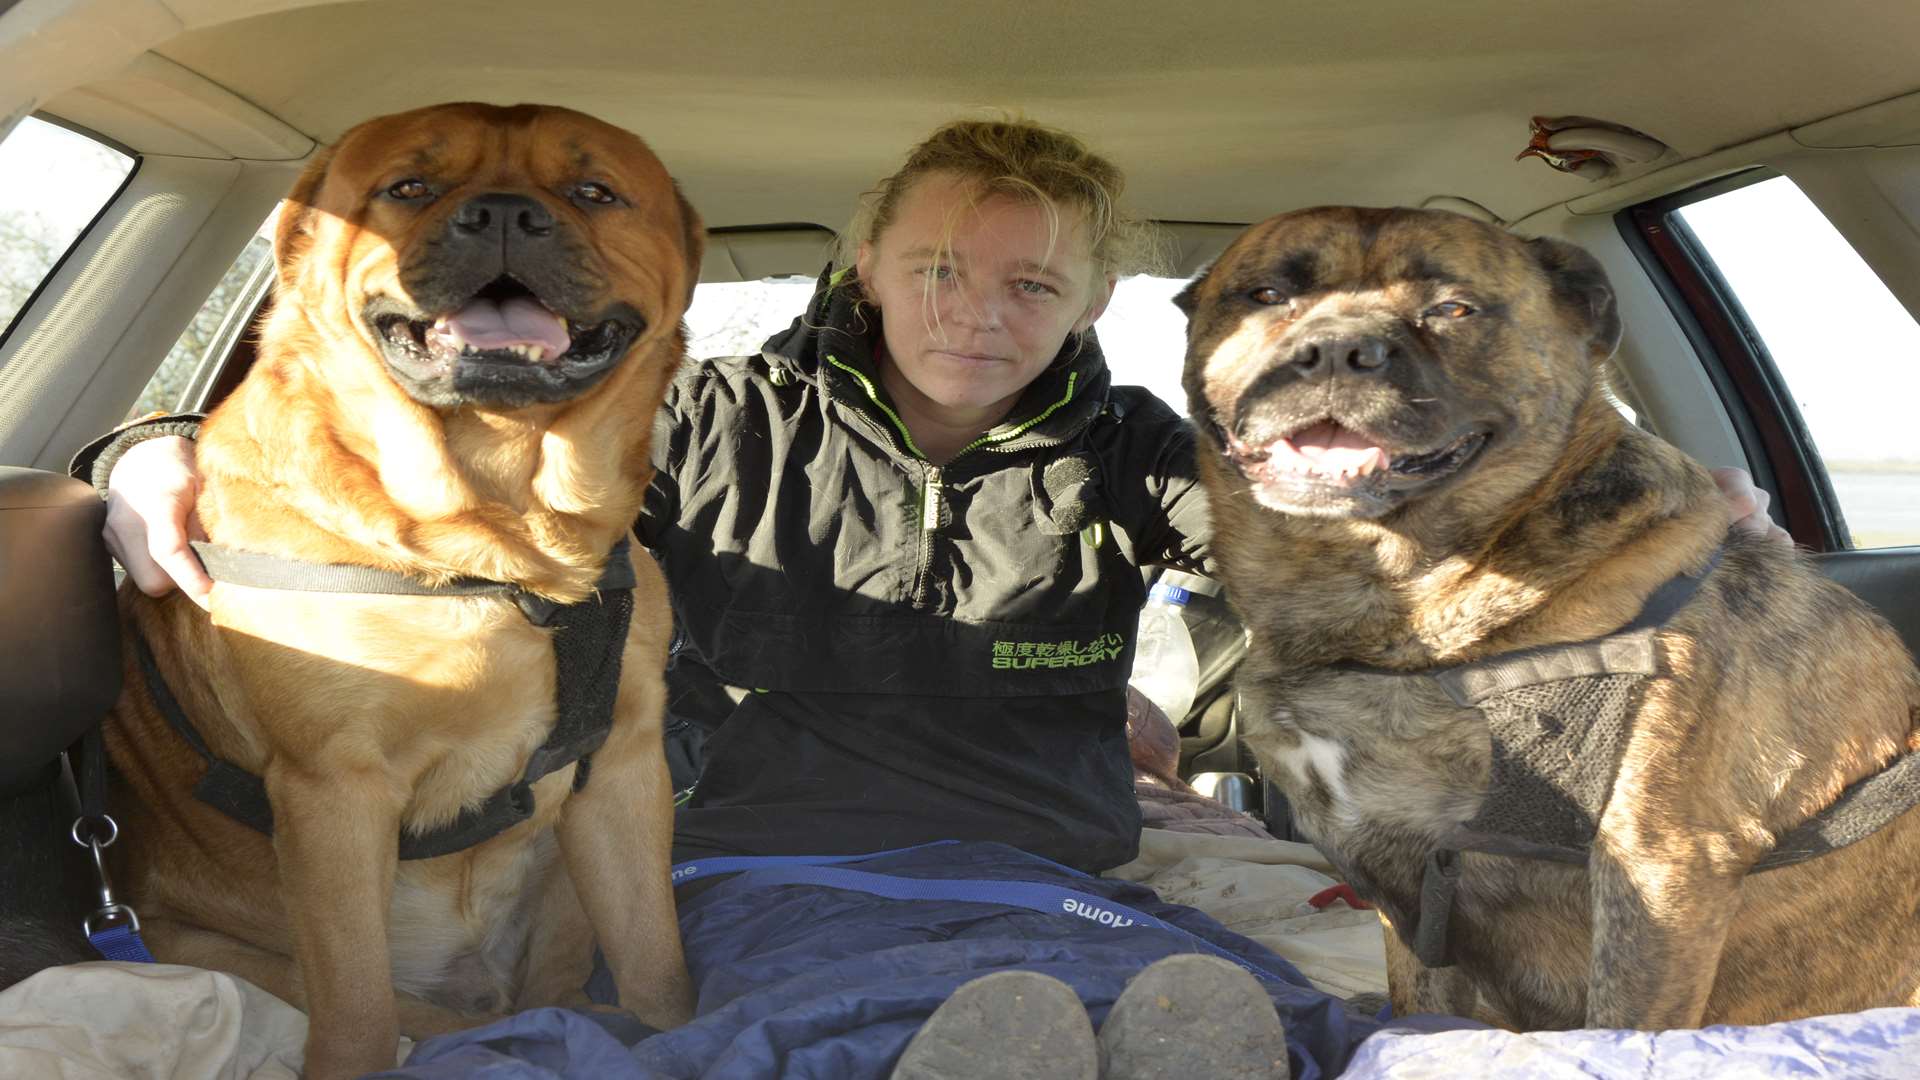 Helen McQuilliams, who is homeless and living in her Ford Focus estate on Raspberry Hill Lane with her two dogs